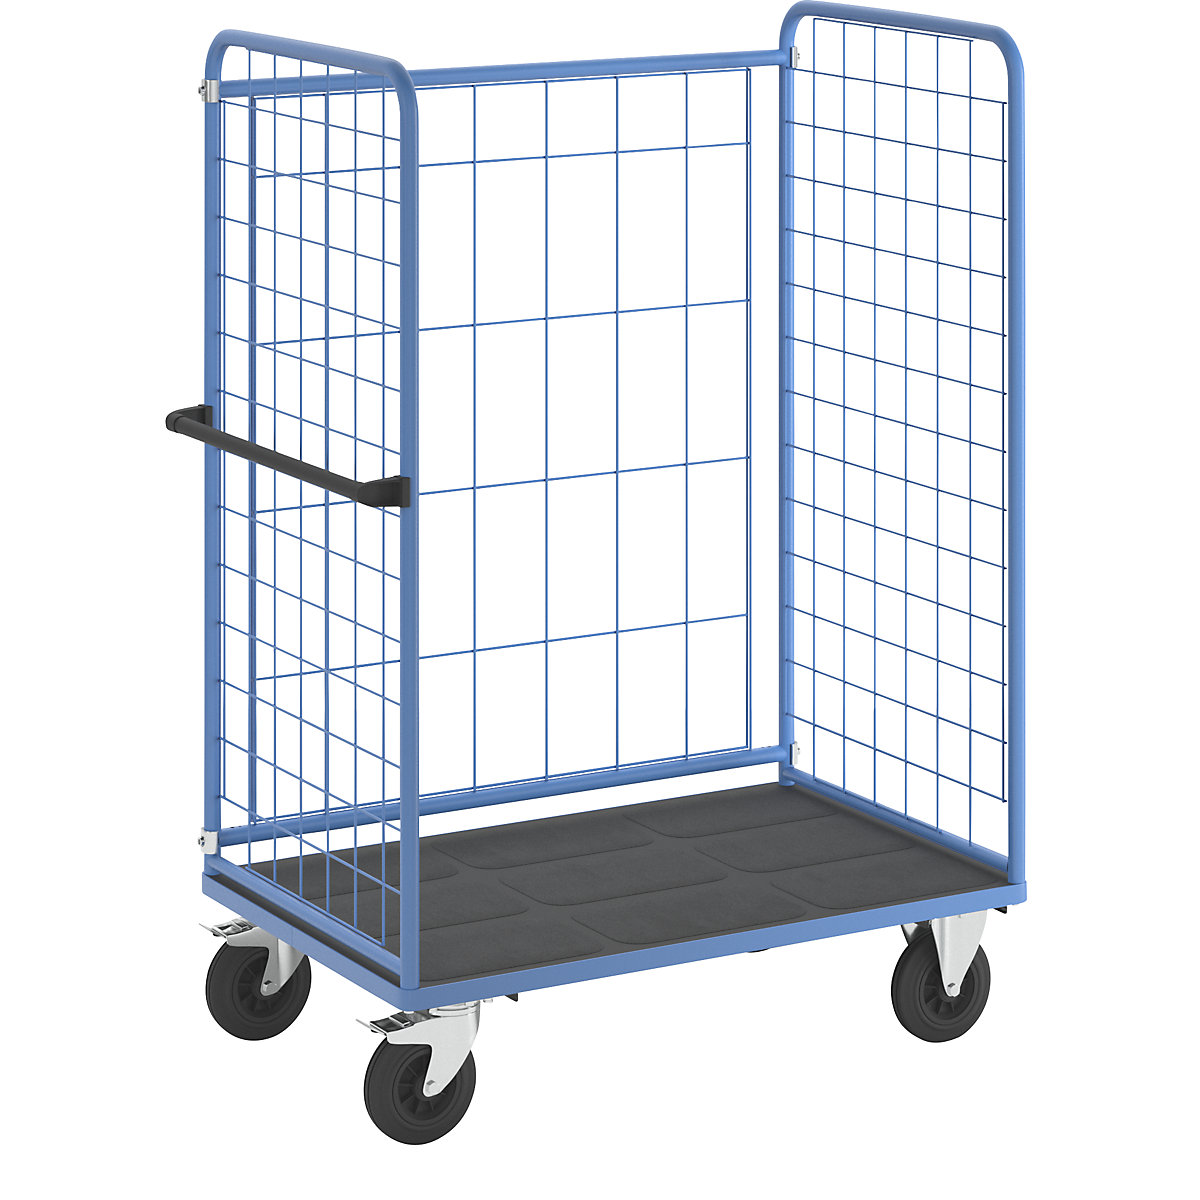 Shelf truck, wire mesh on three sides – eurokraft pro, max. load 500 kg, solid rubber tyres, platform LxW 1140 x 730 mm-11